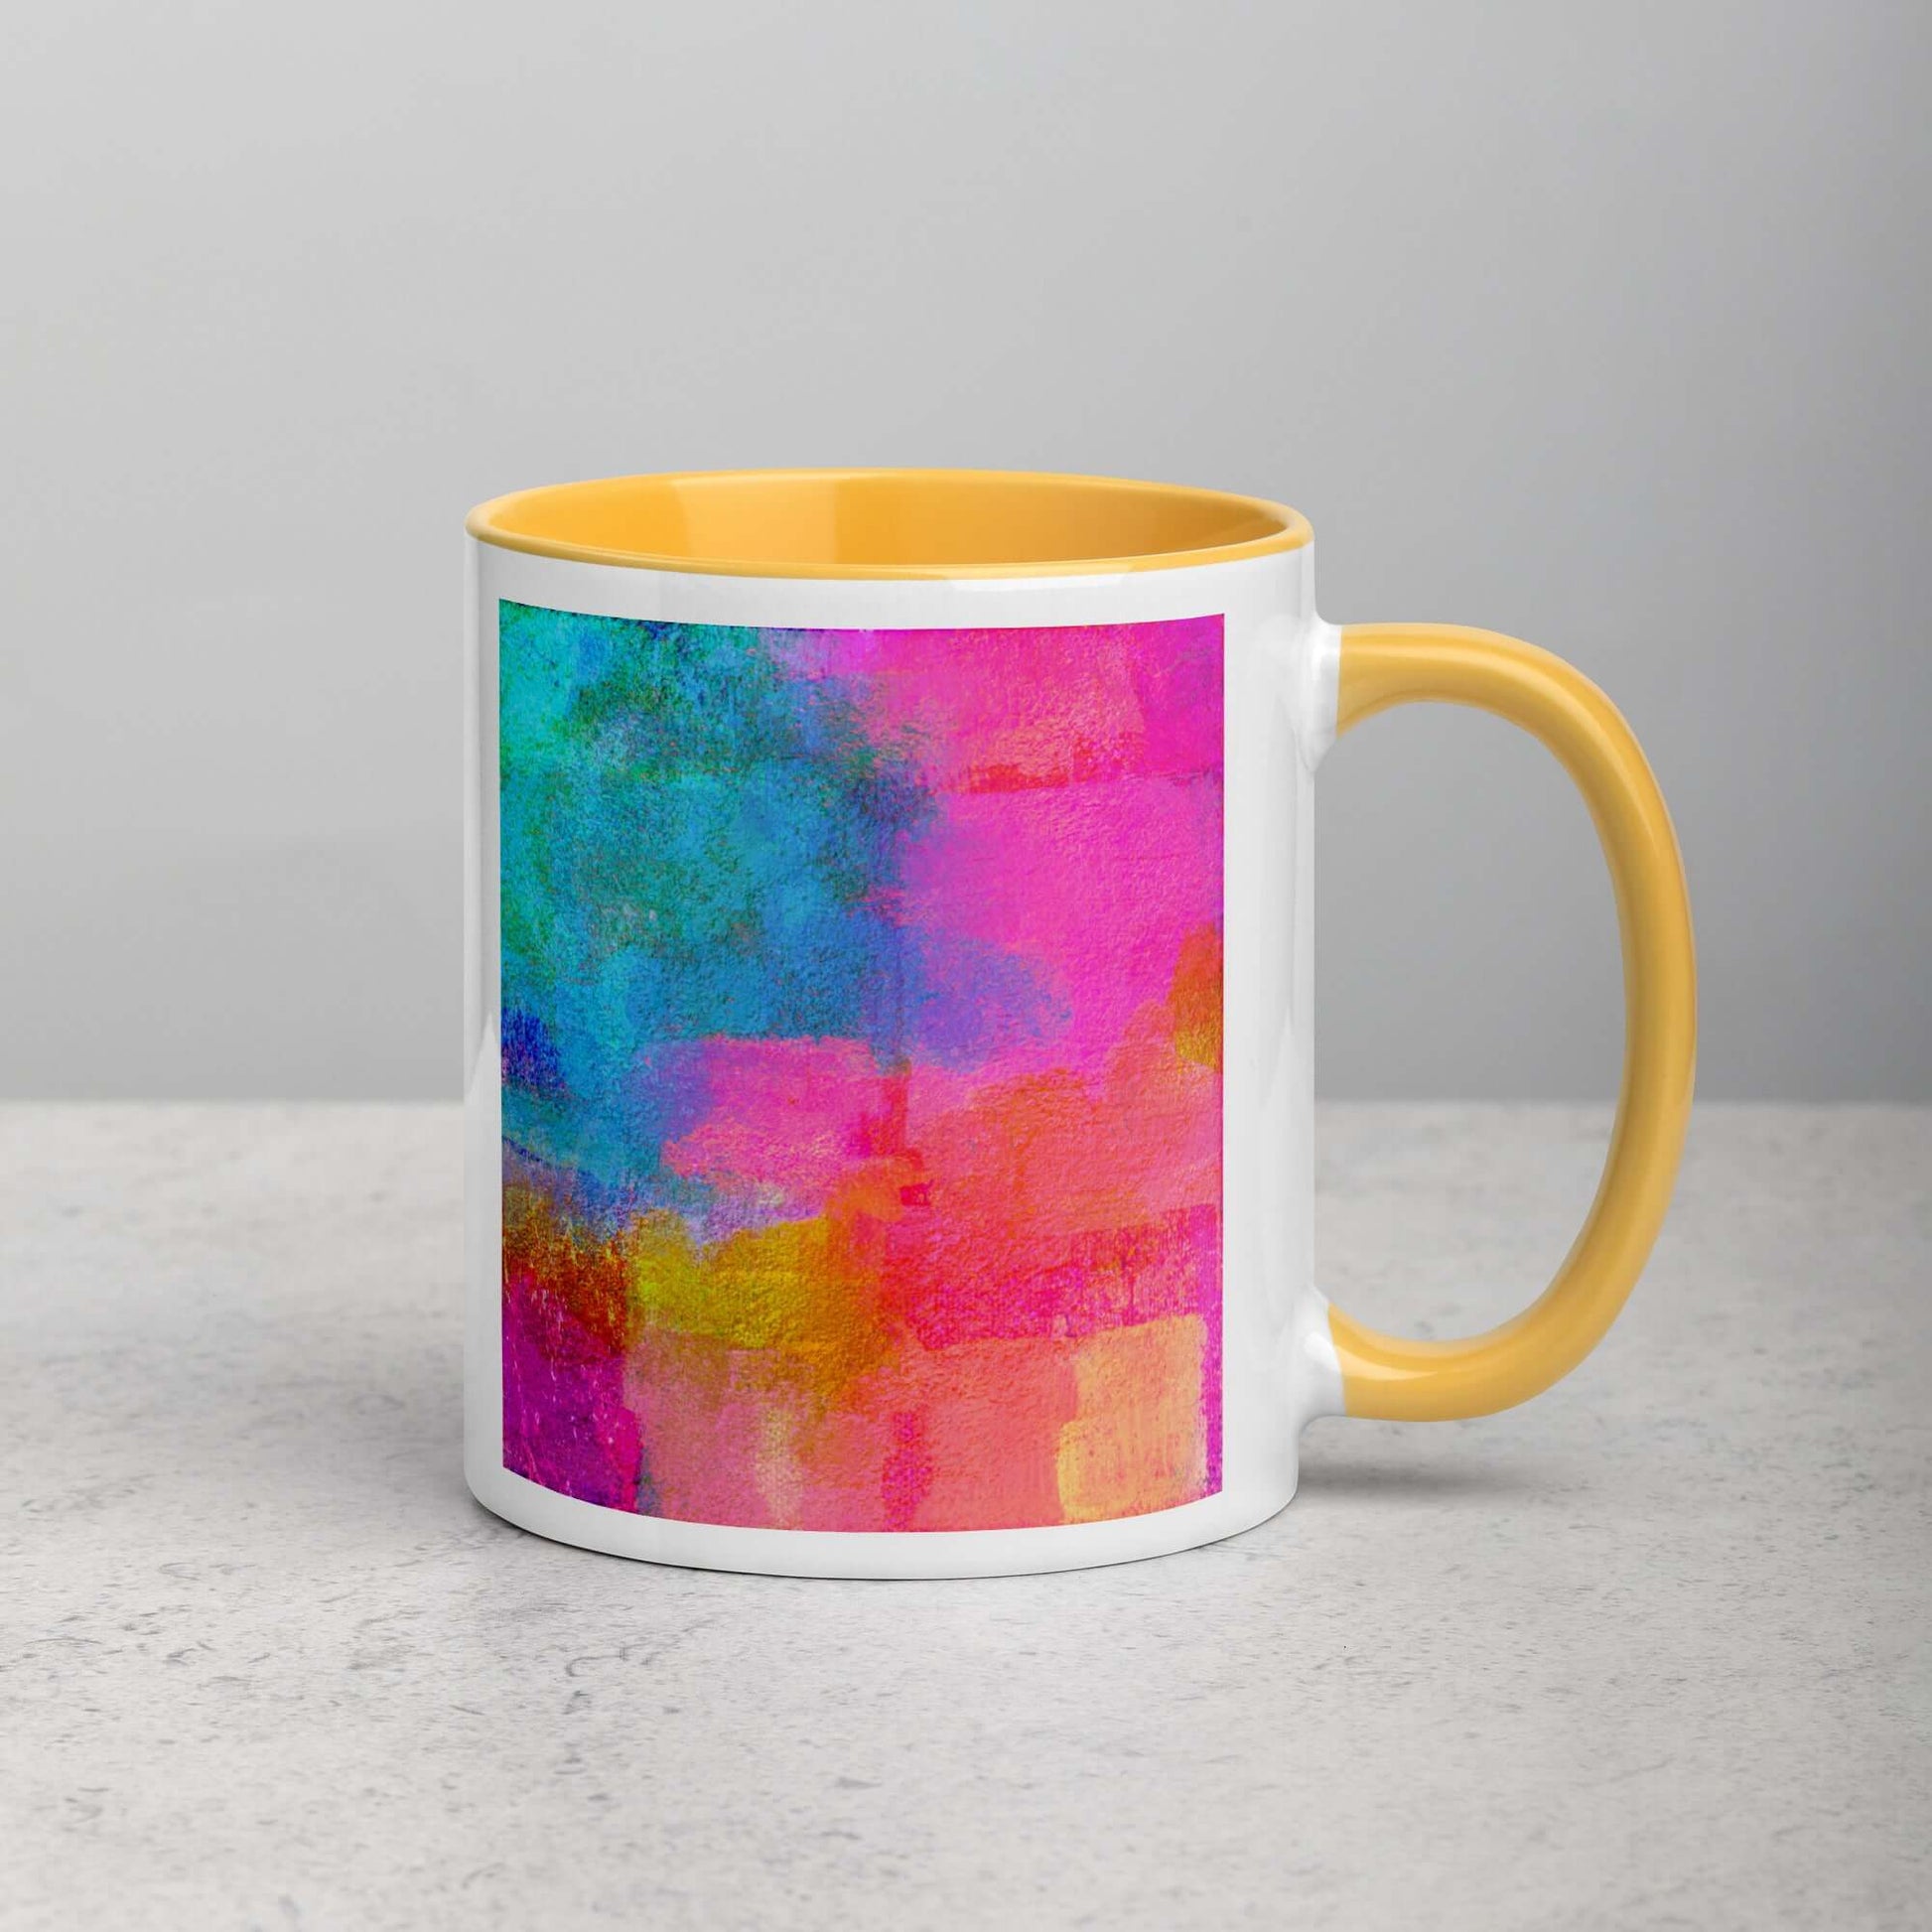 Bold Pink and Blue “Monaco” Abstract Art Mug with Golden Yellow Color Inside Right Handed Front View